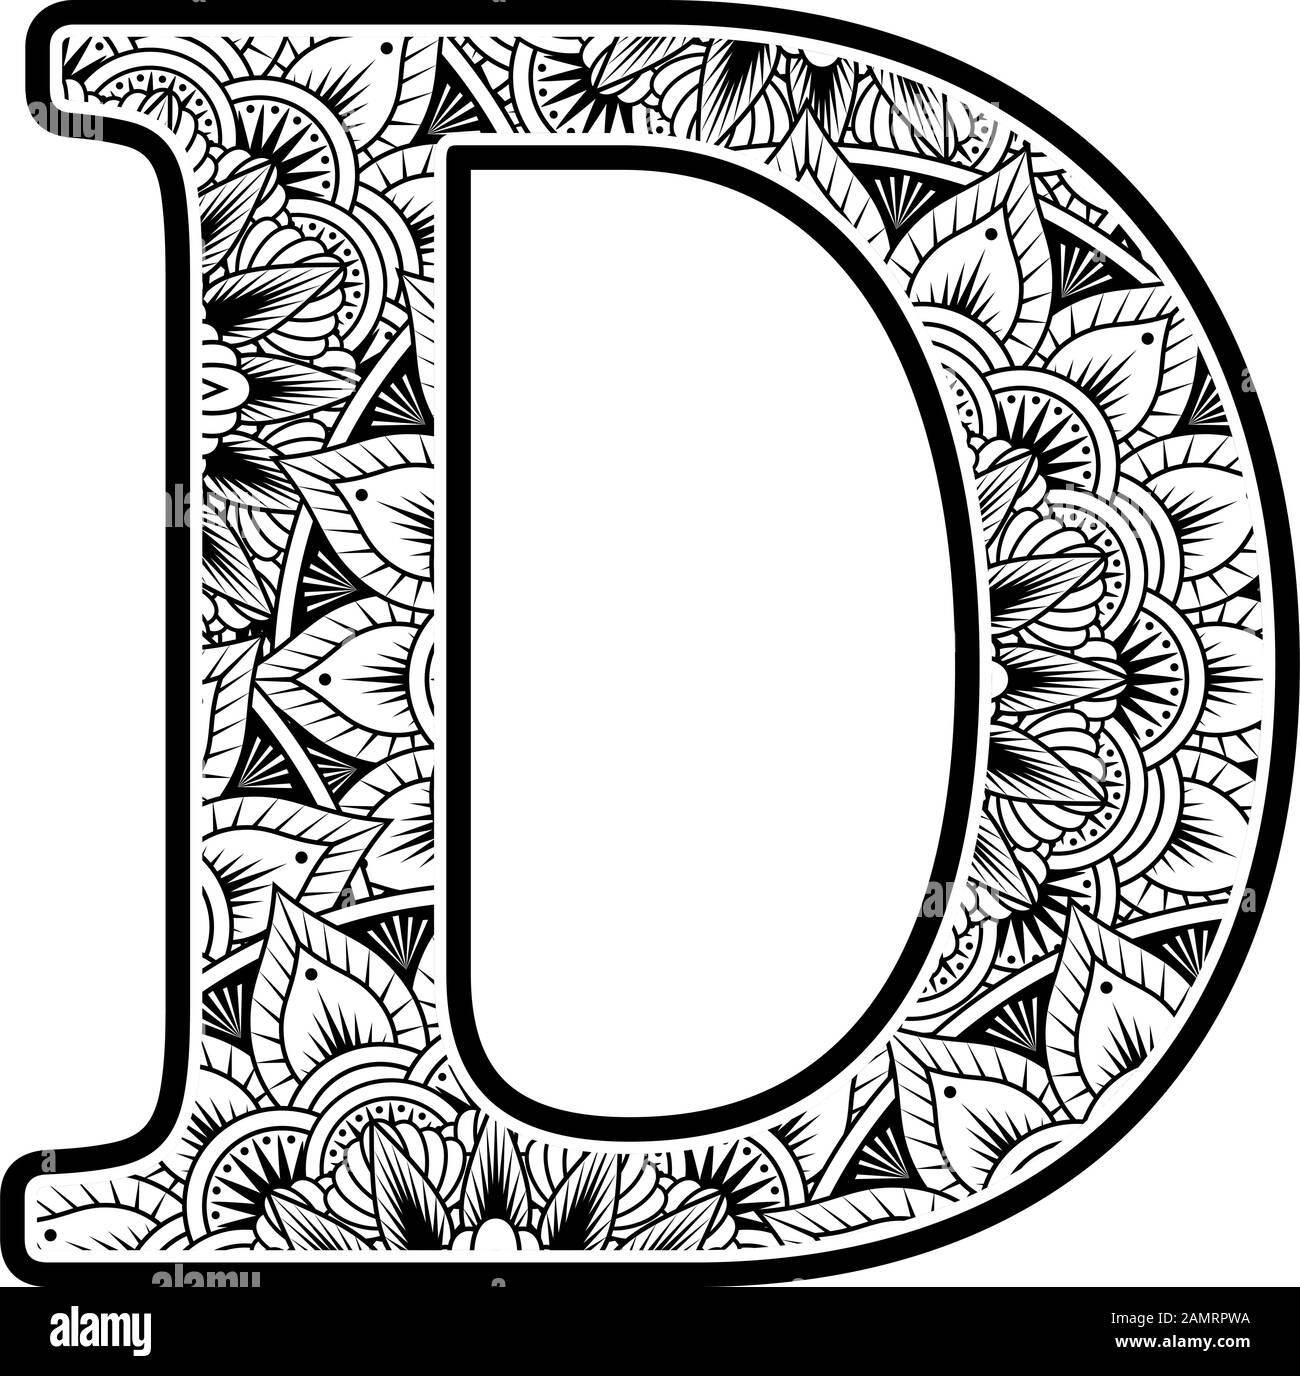 capital letter d with abstract flowers ornaments in black and white ...